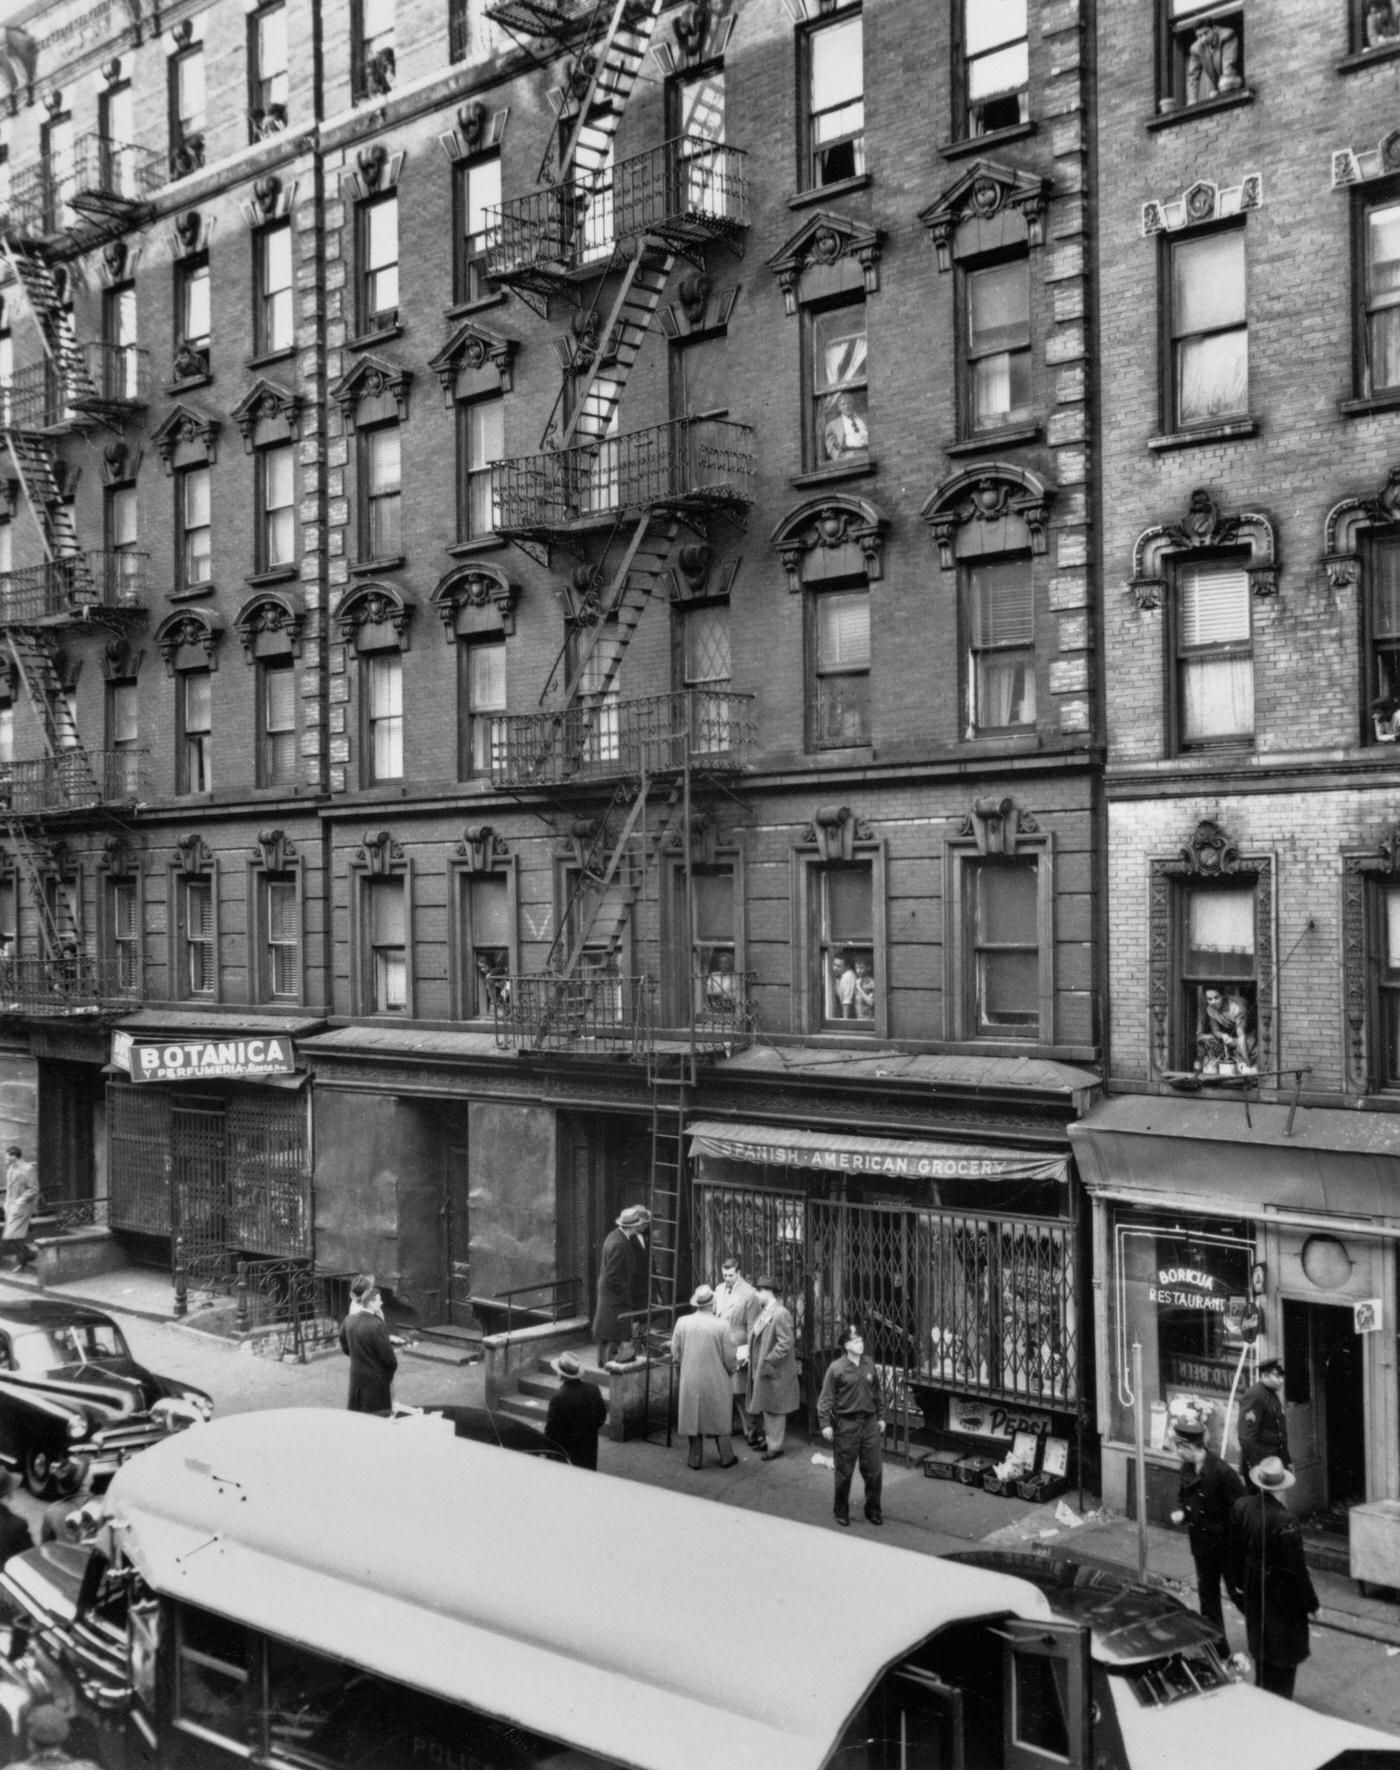 Pedestrians And Residents Of Tenement Buildings On East Side Of Manhattan, 1955